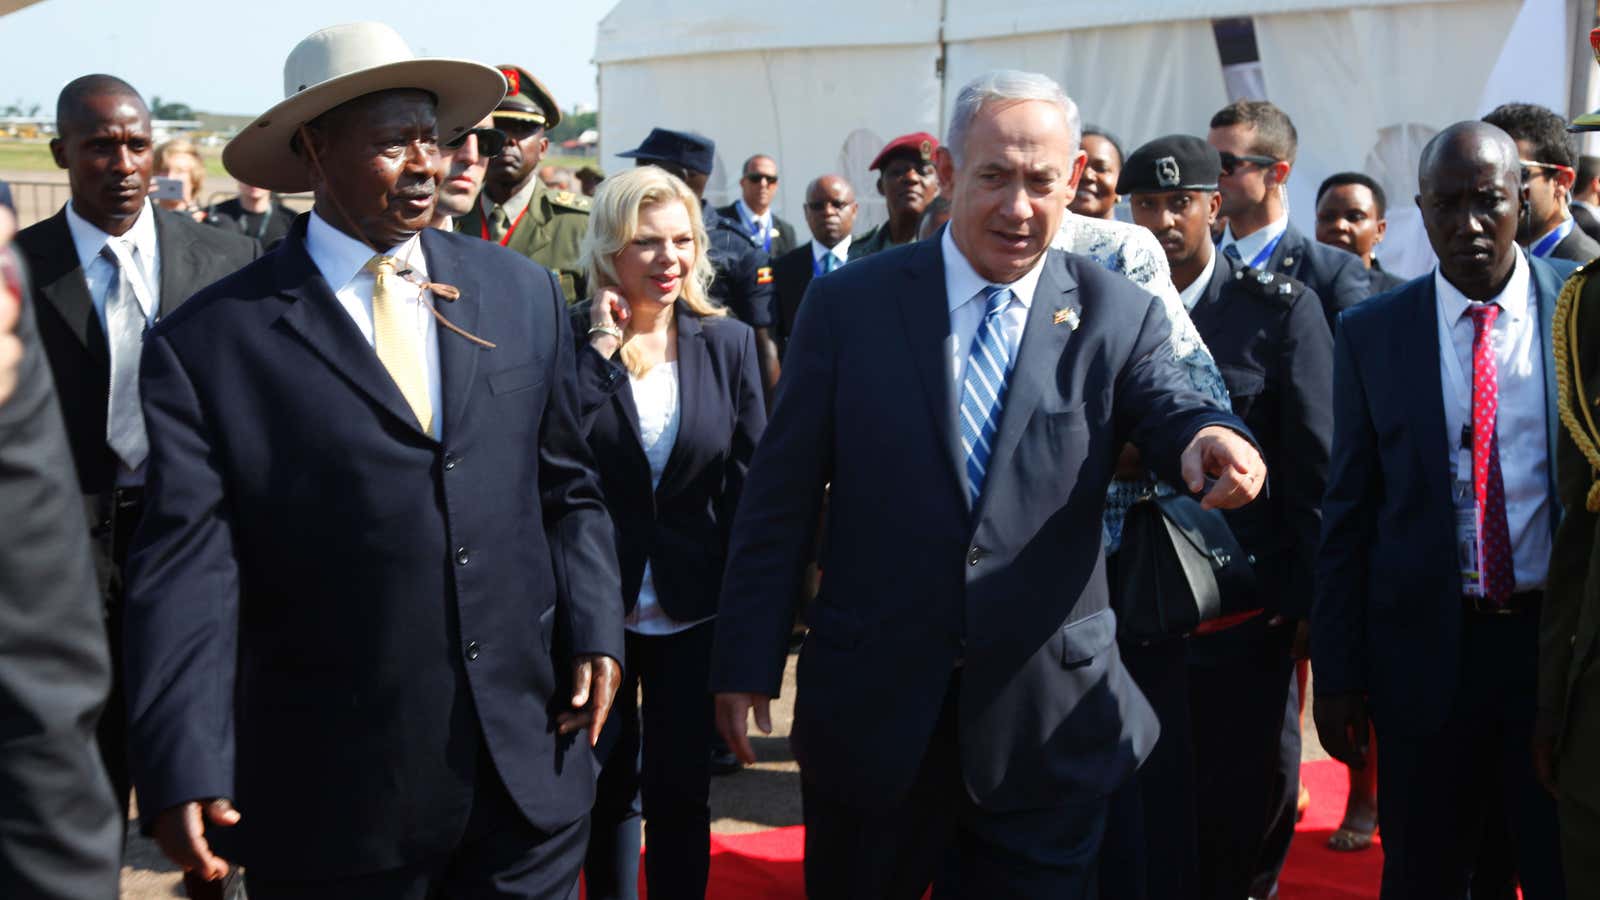 Israeli Prime Minister, Benjamin Netanyahu, right, is greeted by Ugandan President, Yoweri Museveni, on this arrival in at Entebbe airport.